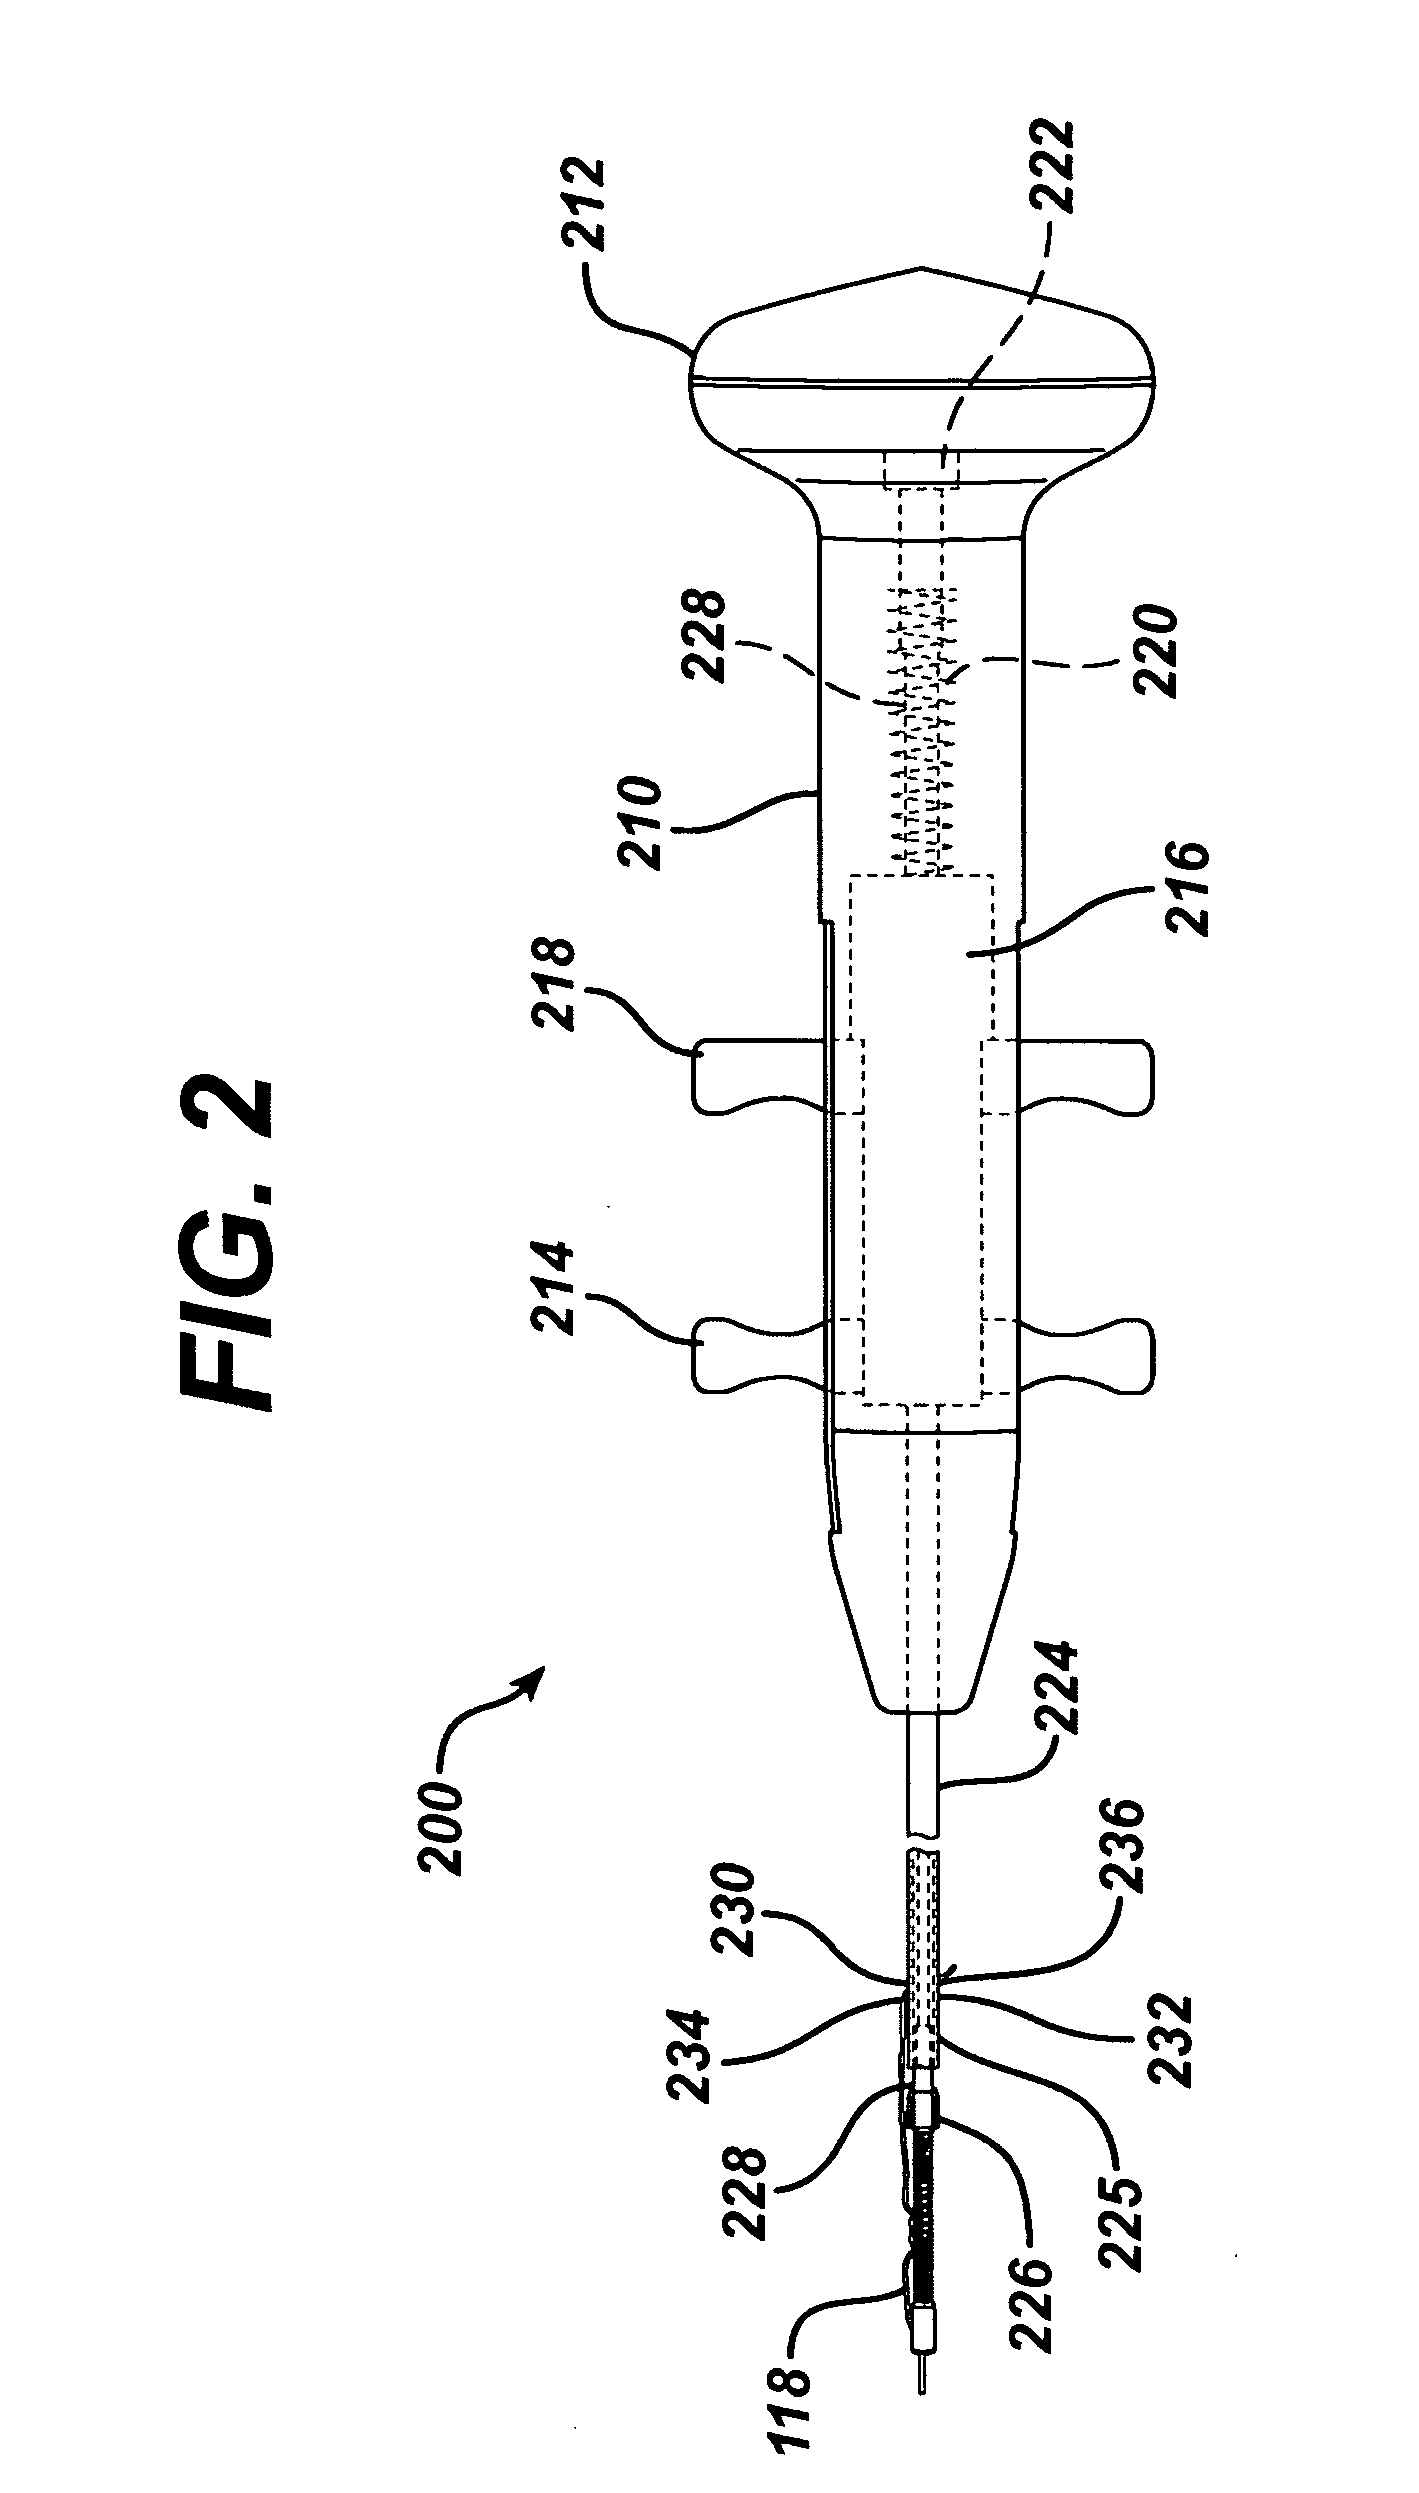 Devices for locking and/or cutting a suture